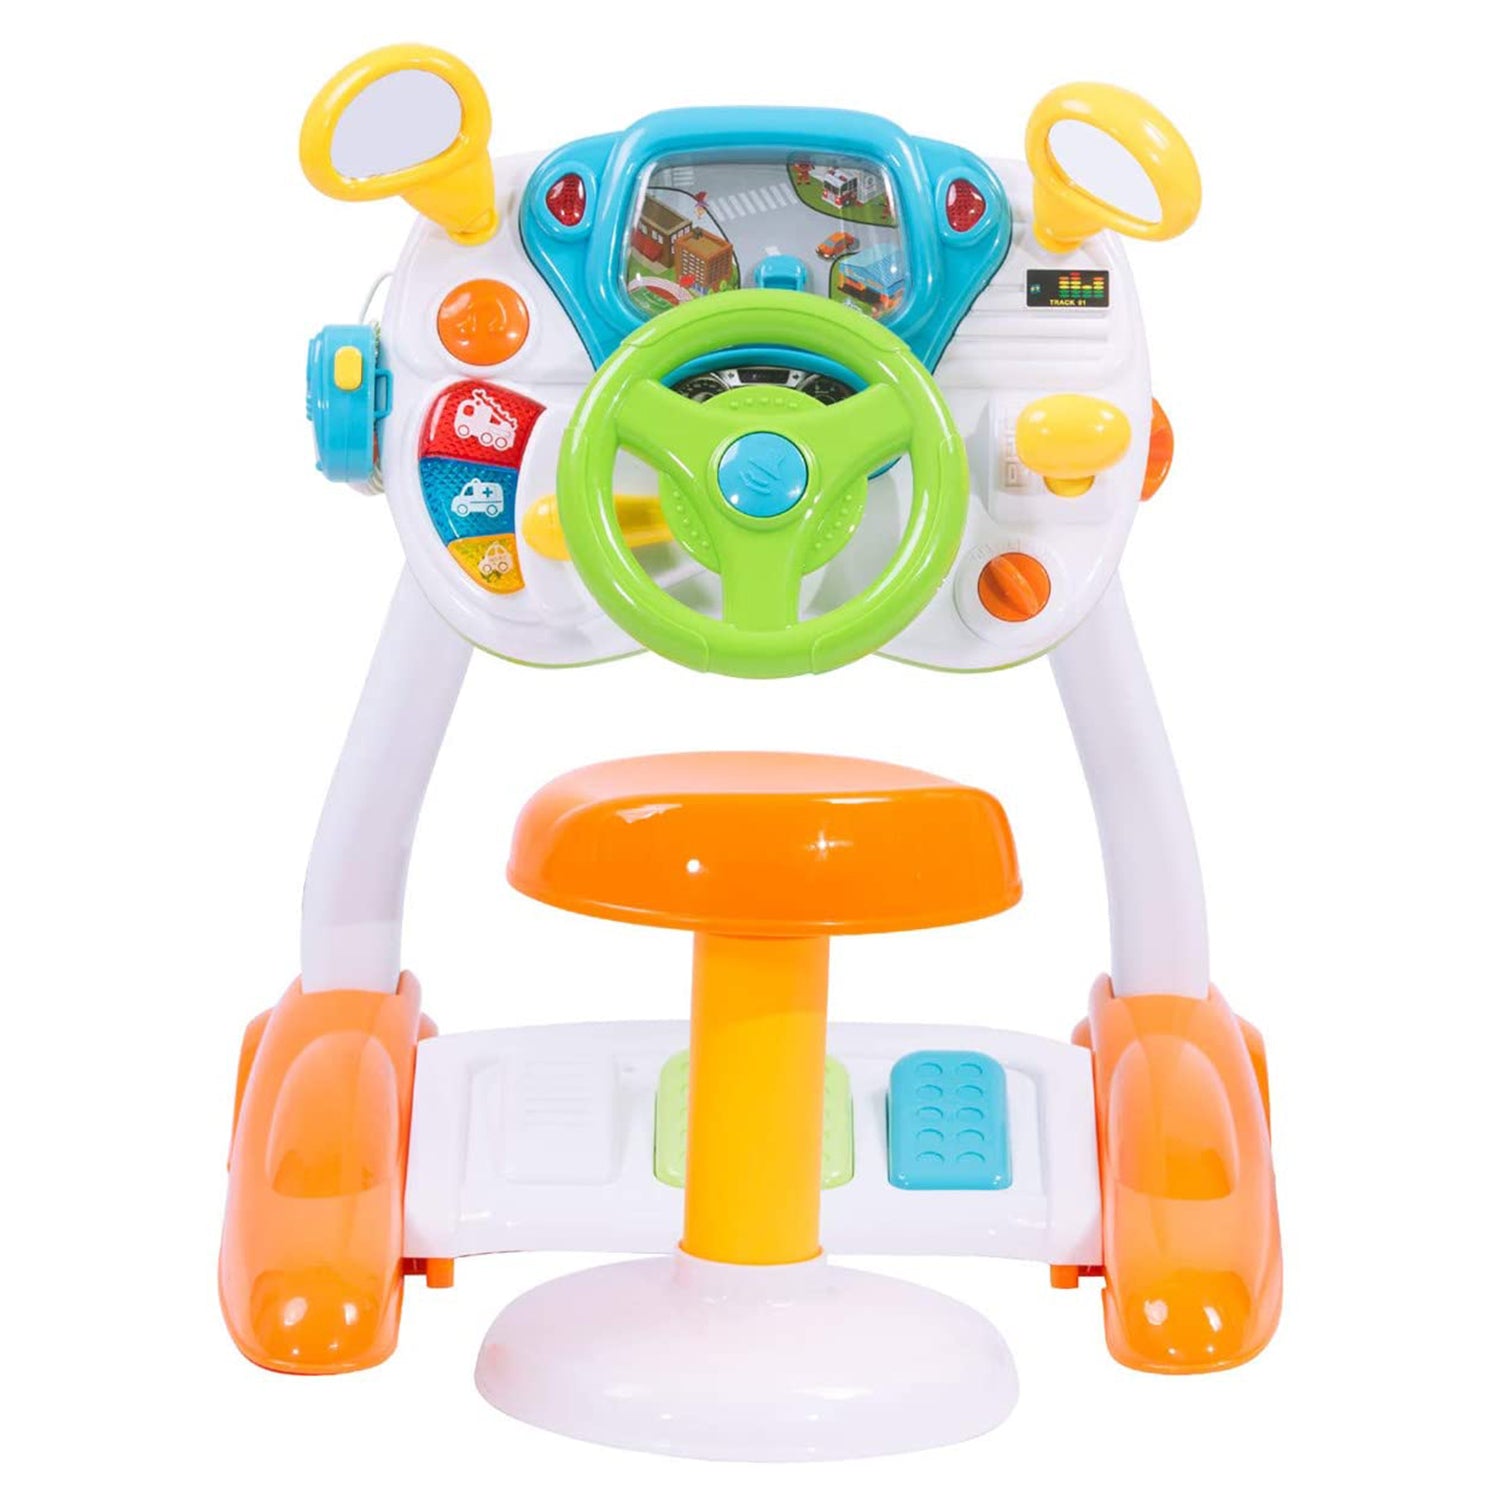 Kids Pretend Ride on Toy Steering Wheel Driving Car Simulate Toys for Toddlers